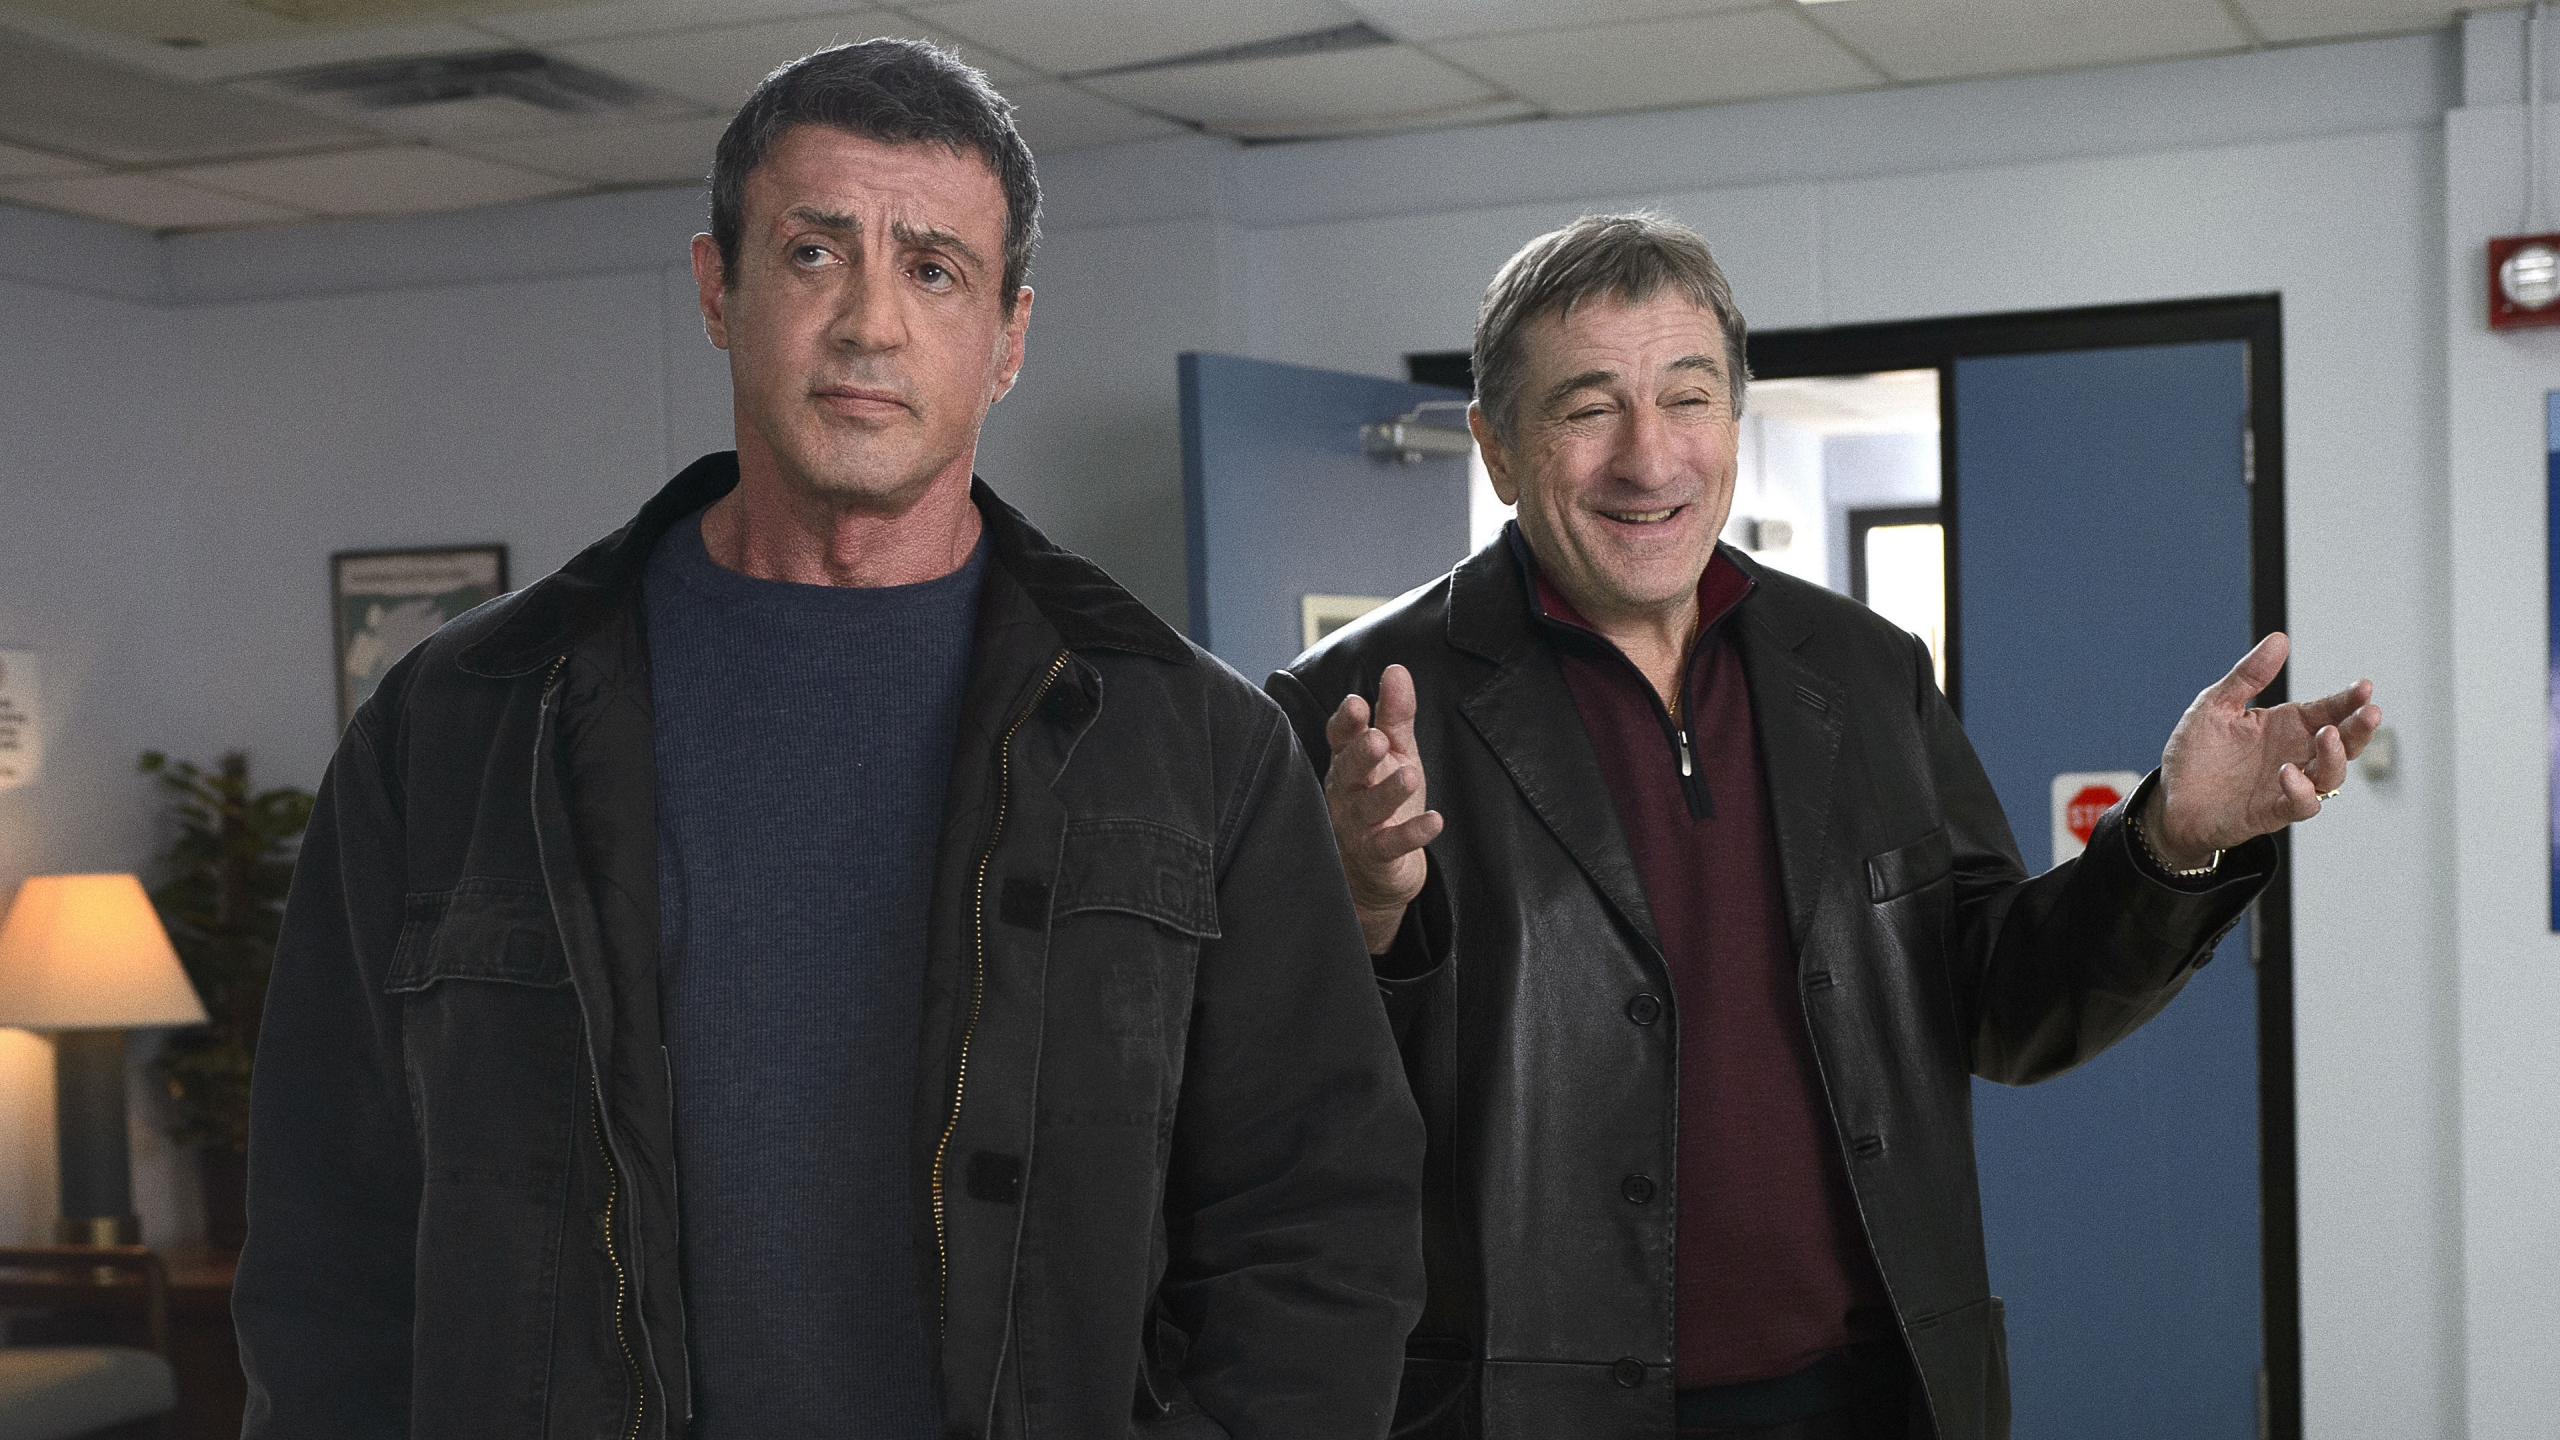 Stallone and Niro in Grudge Match for 2560x1440 HDTV resolution